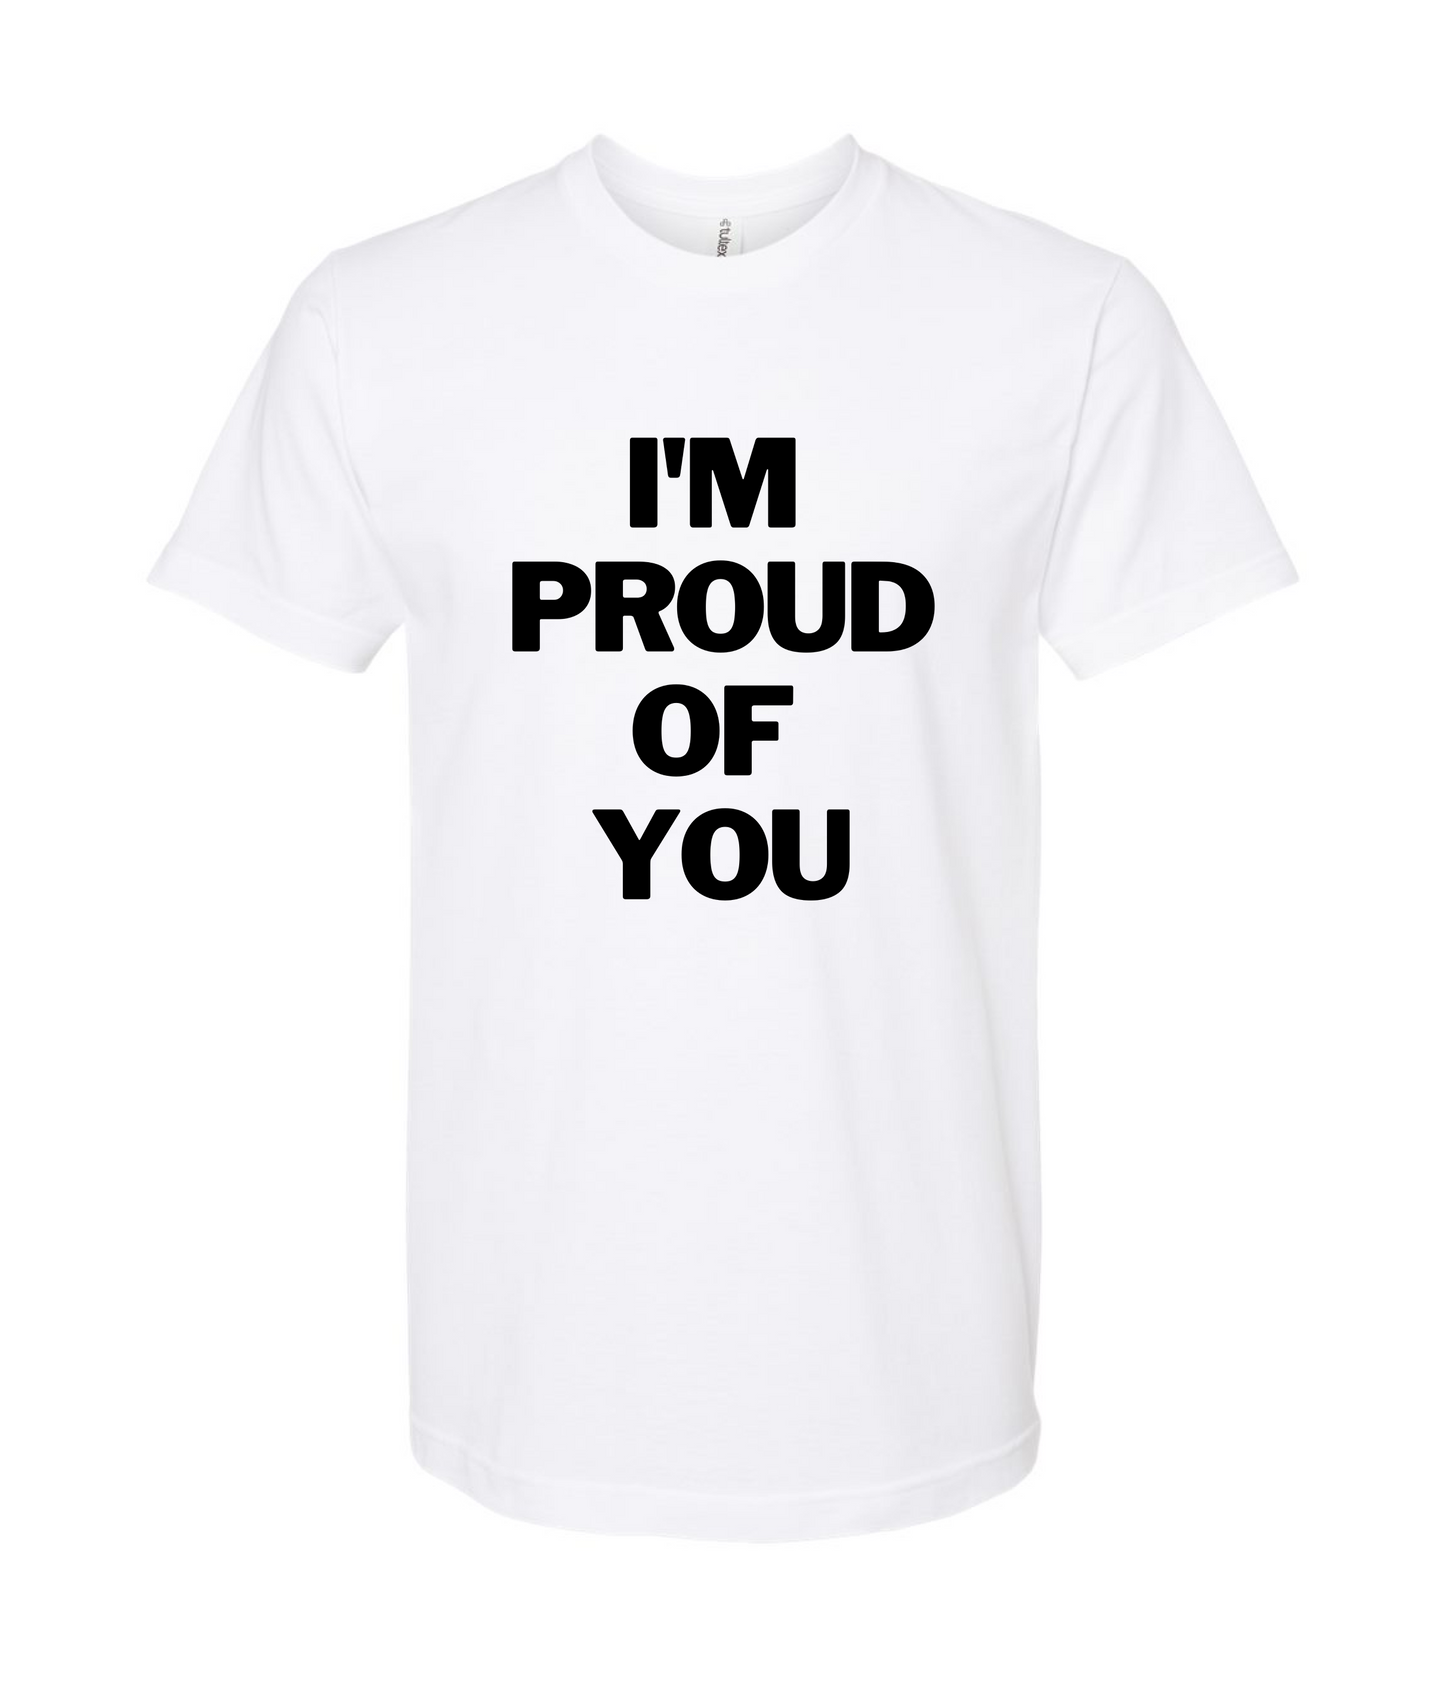 Jamie Campbell - Proud of You - White T-Shirt